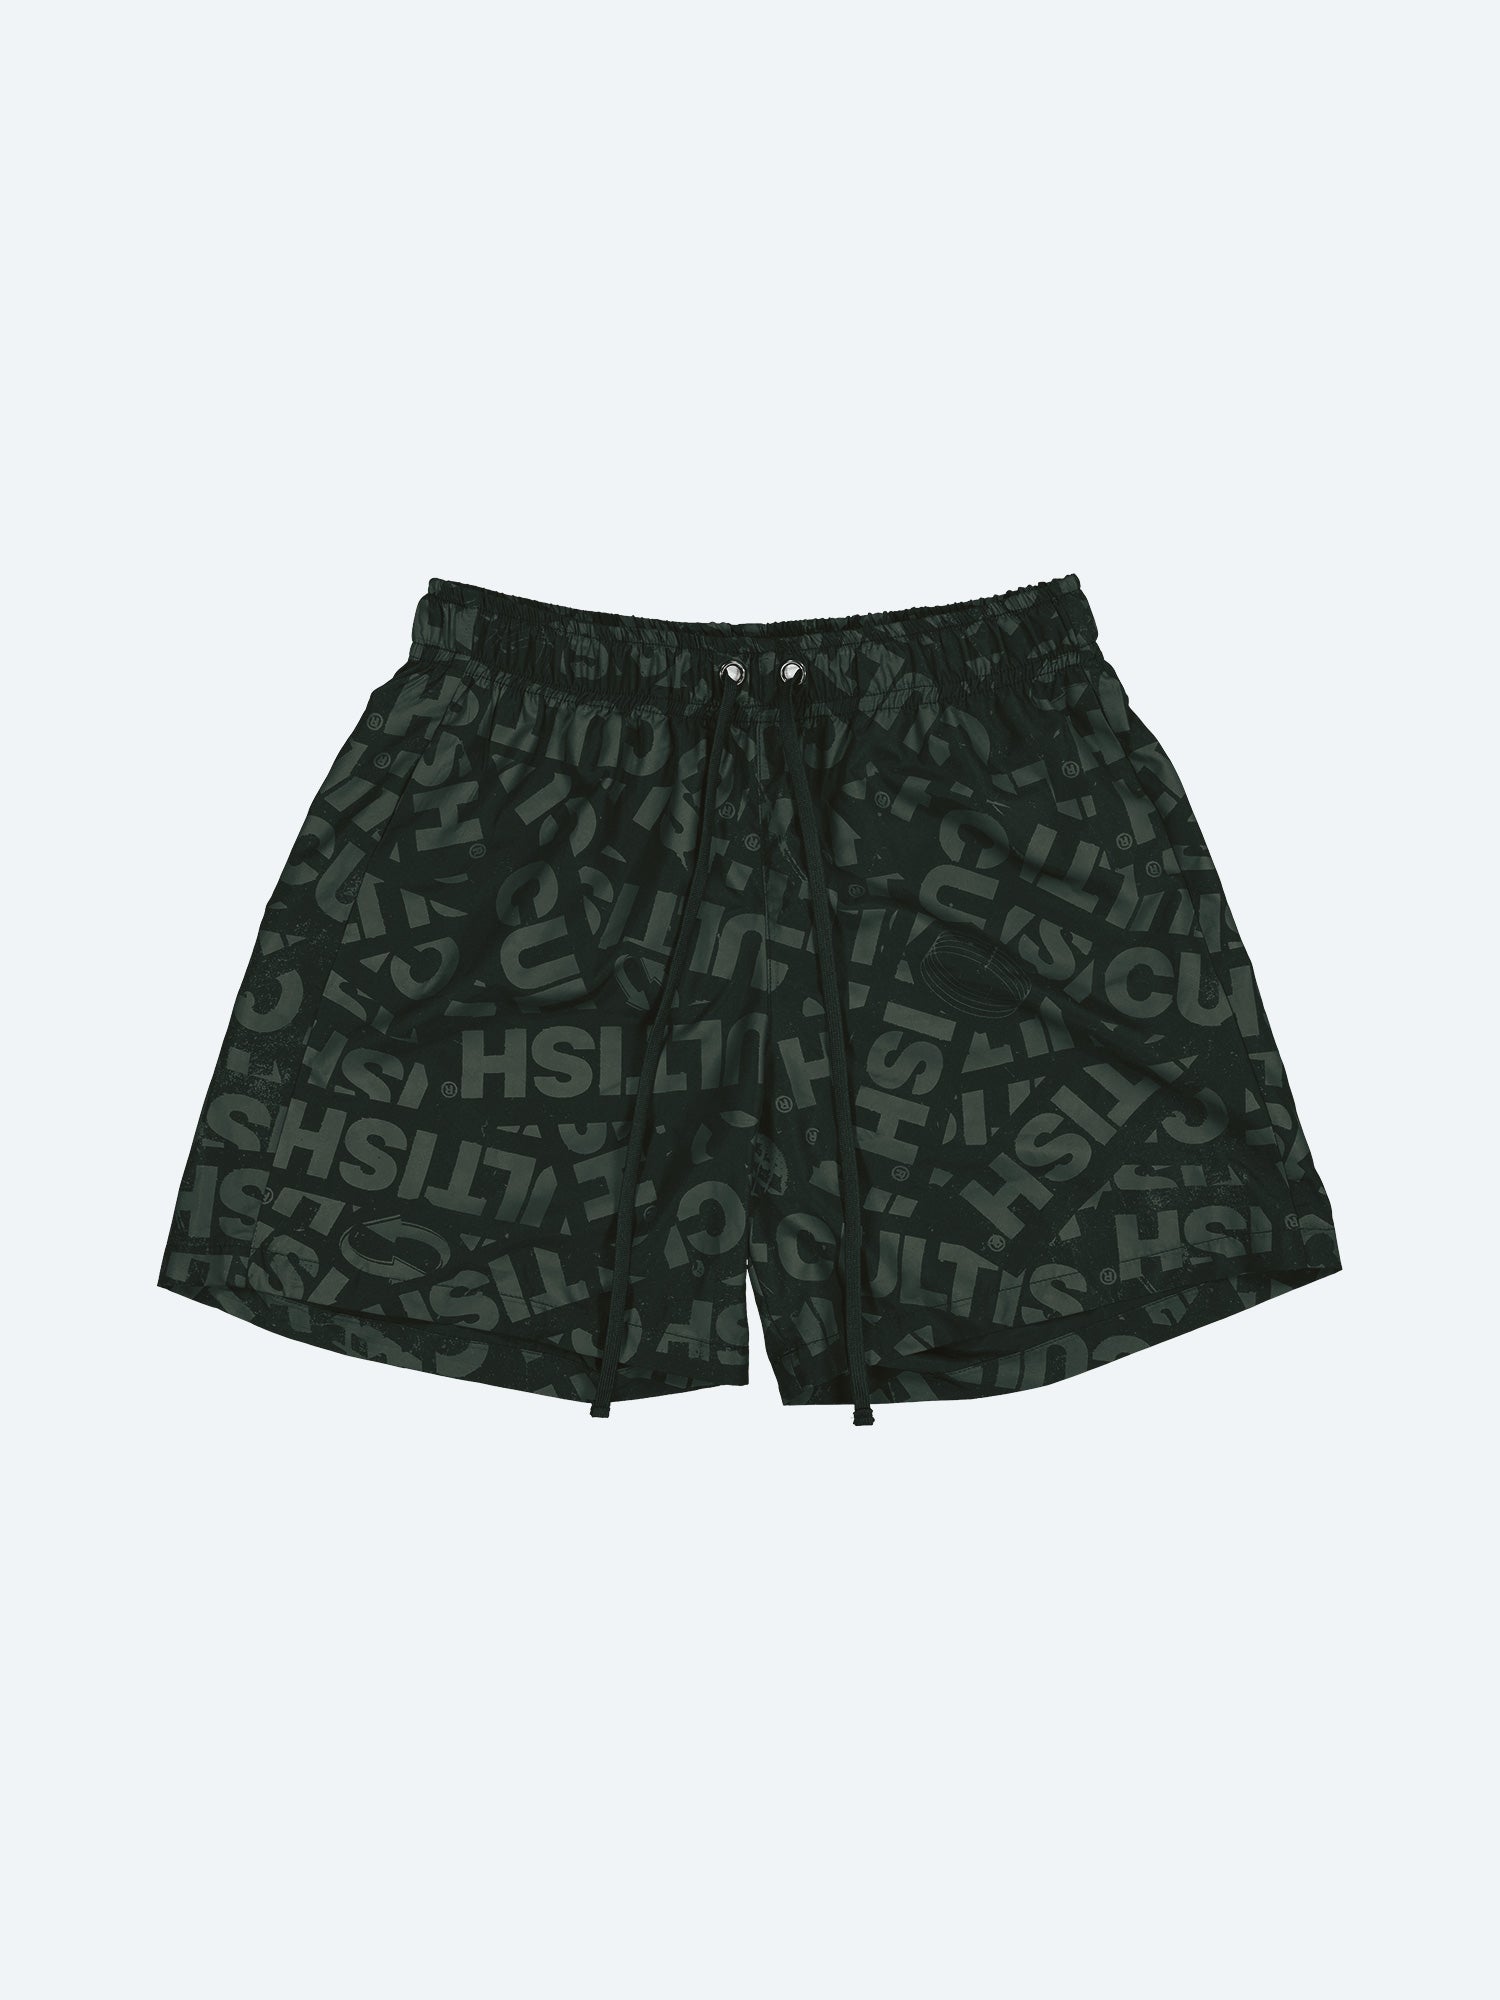 All-Over Sports Short / Black